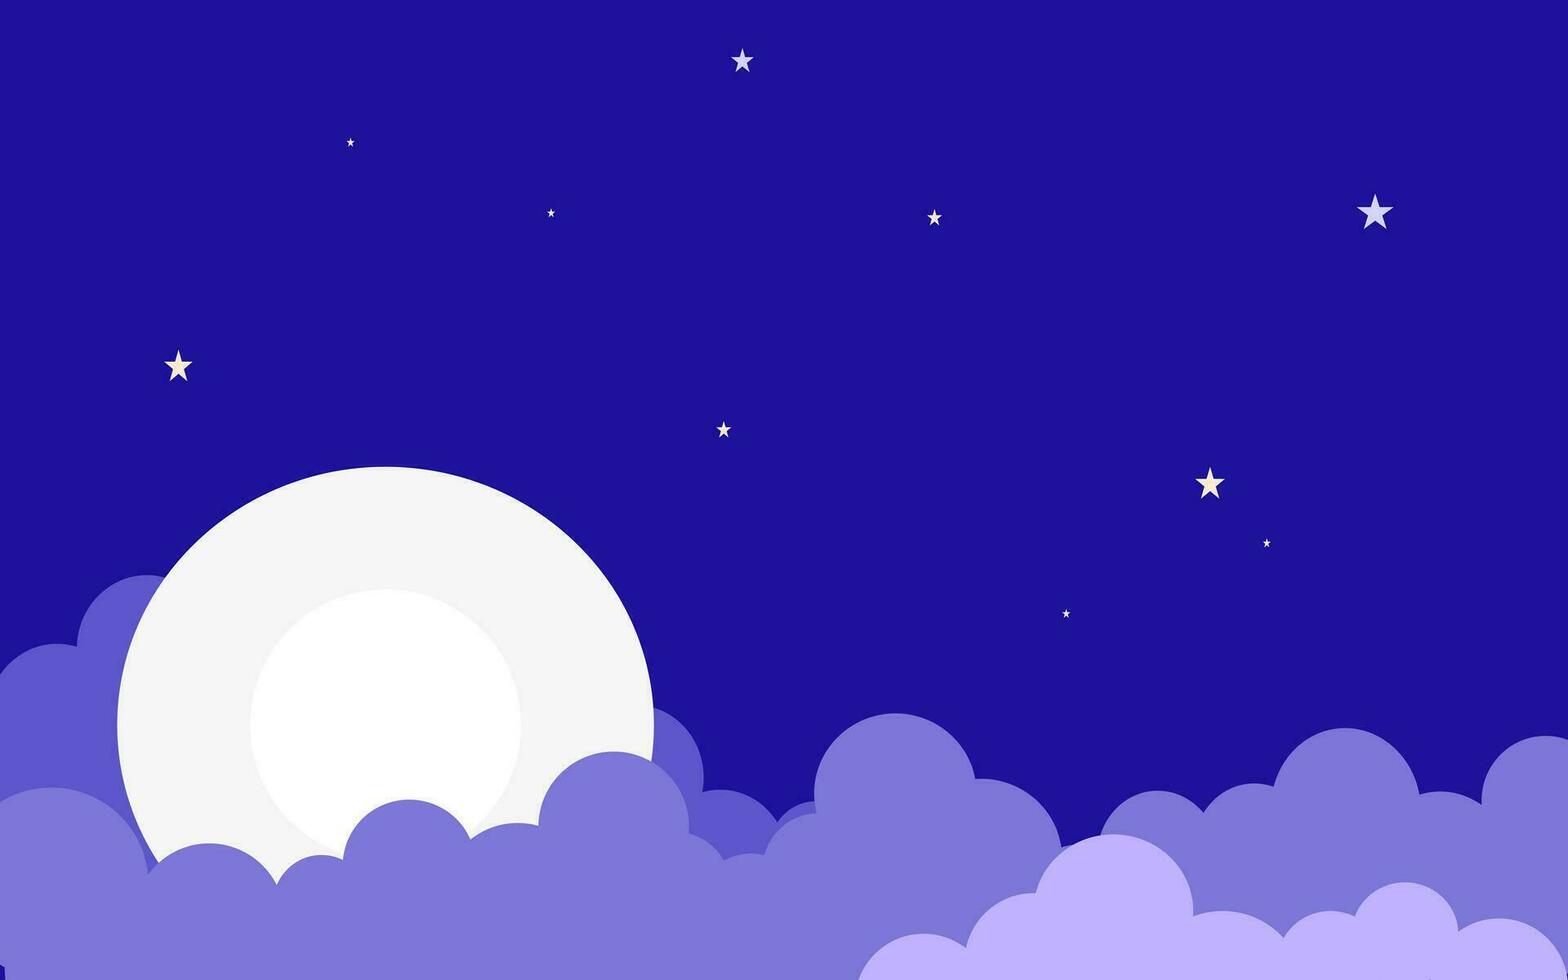 Night Sky with Moon and Clouds Paper Cut vector